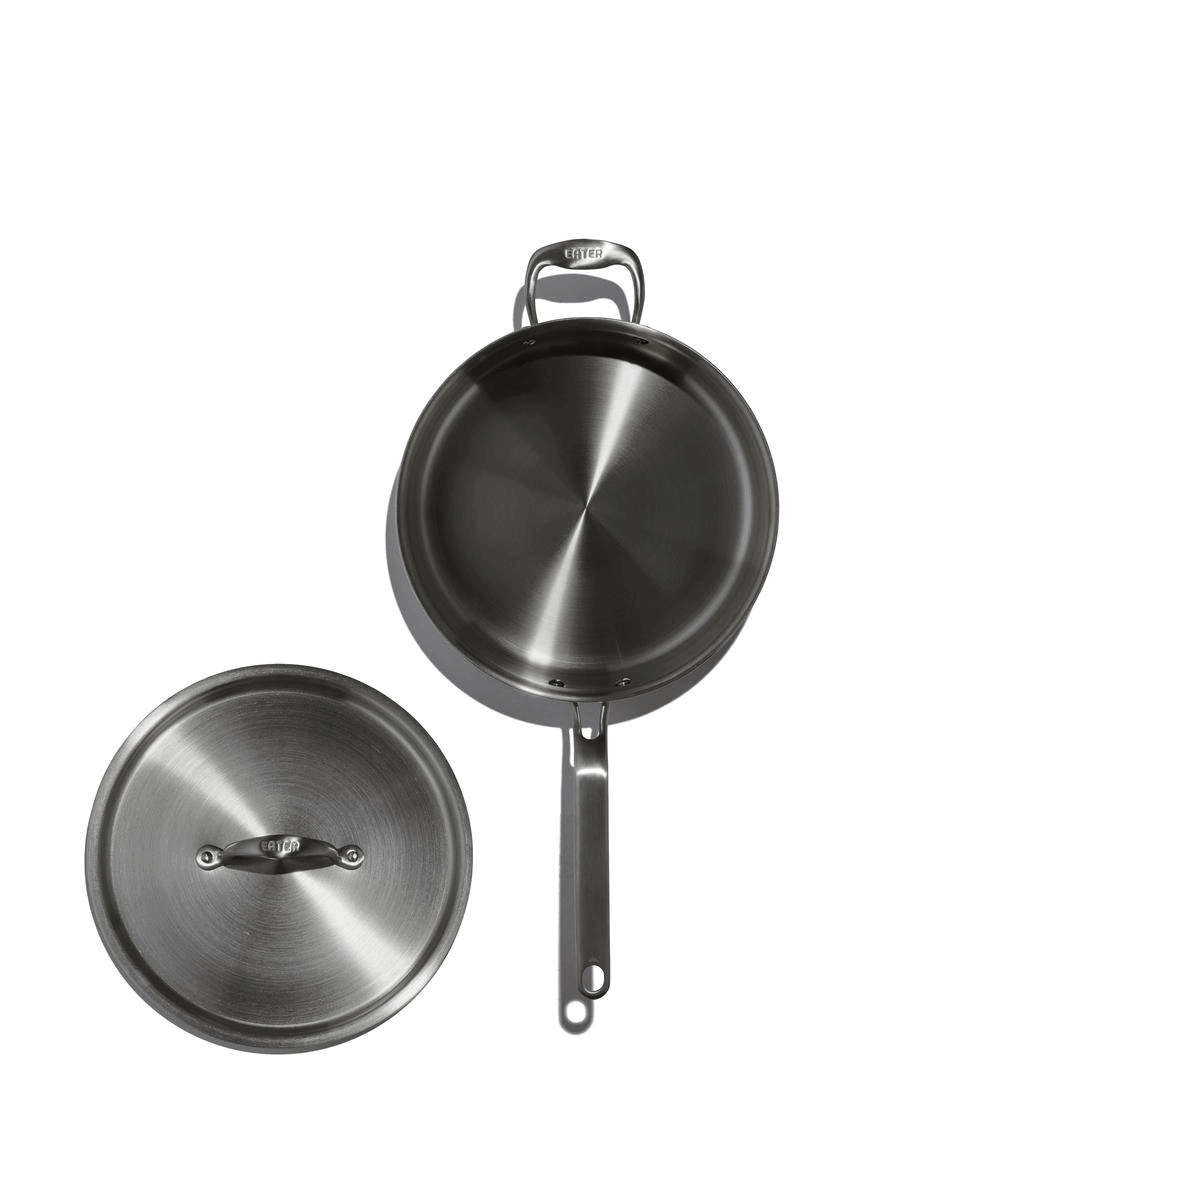 Heritage Steel Cookware Stainless Steel Deep Saute Pan with Cover